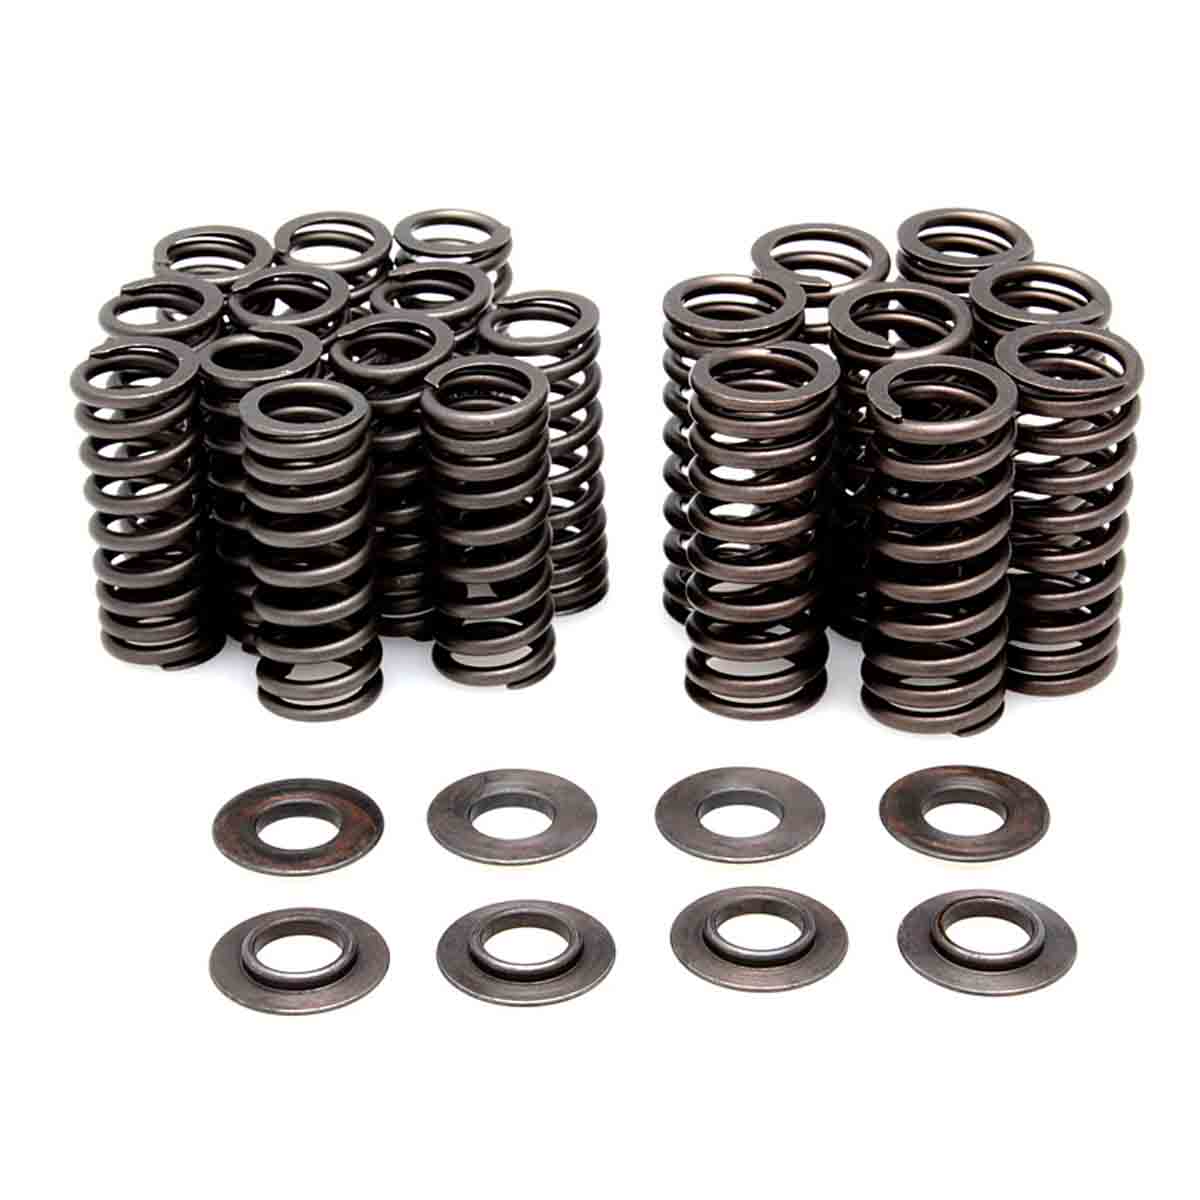 Spring Only Kit, High Perf., 0.350" Lift, Various Yamaha® Applications